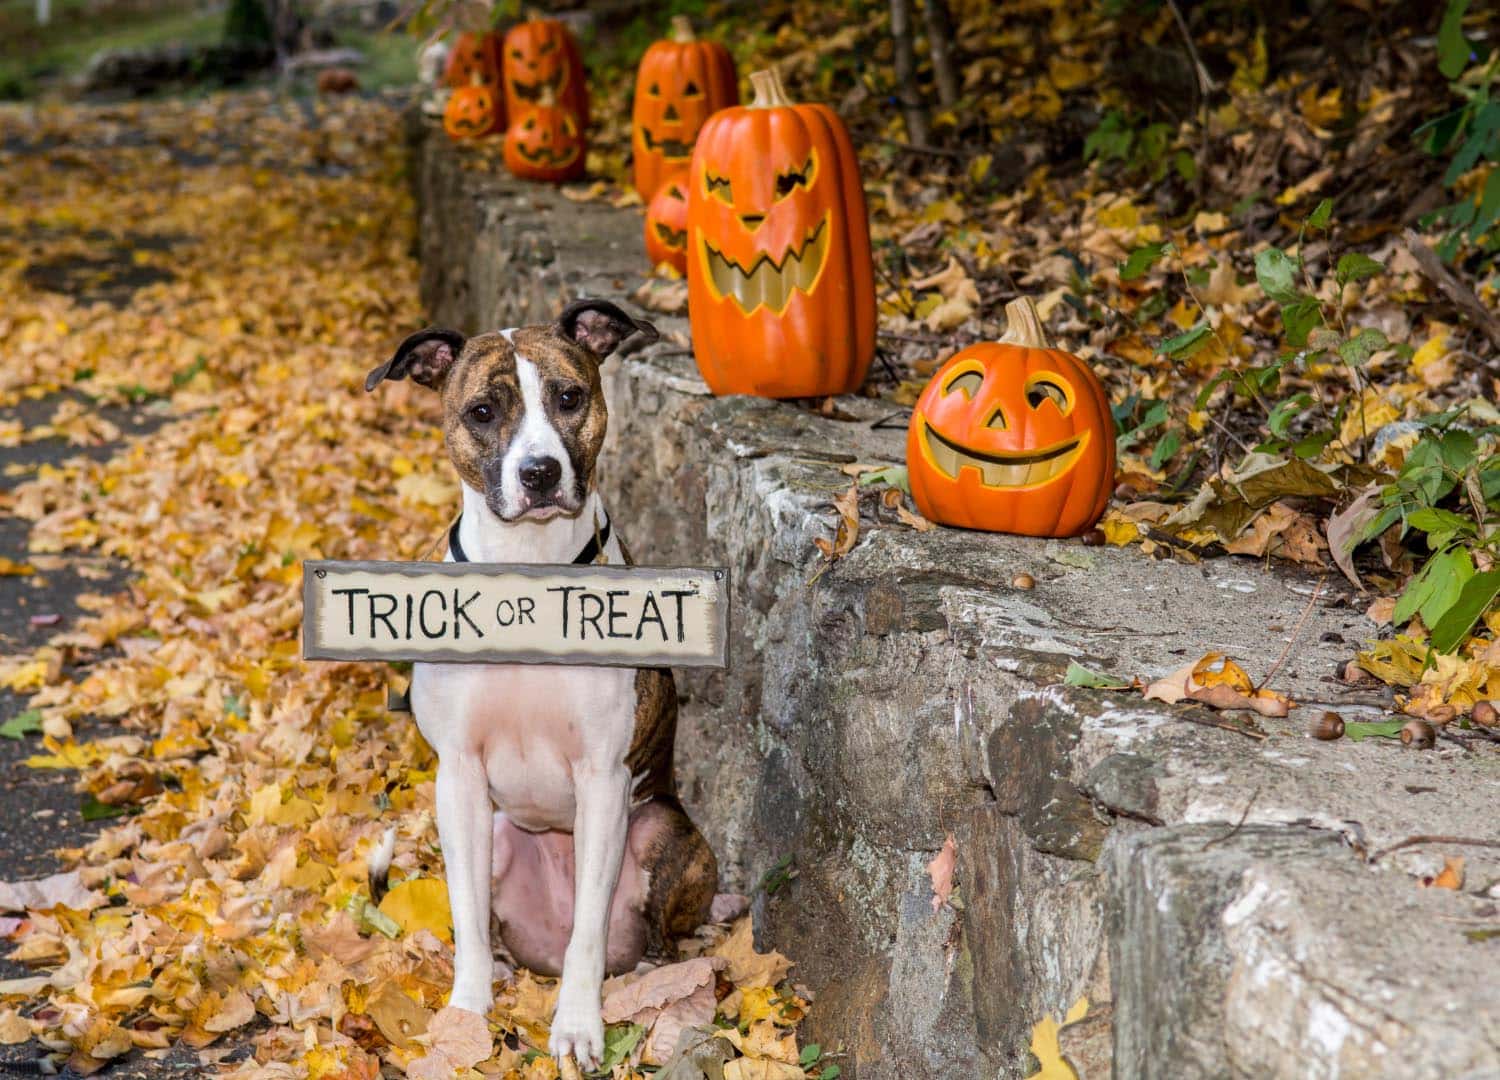 A dog sitting next to jack-o-lanterns with a trick or treat sign hanging from its neck.